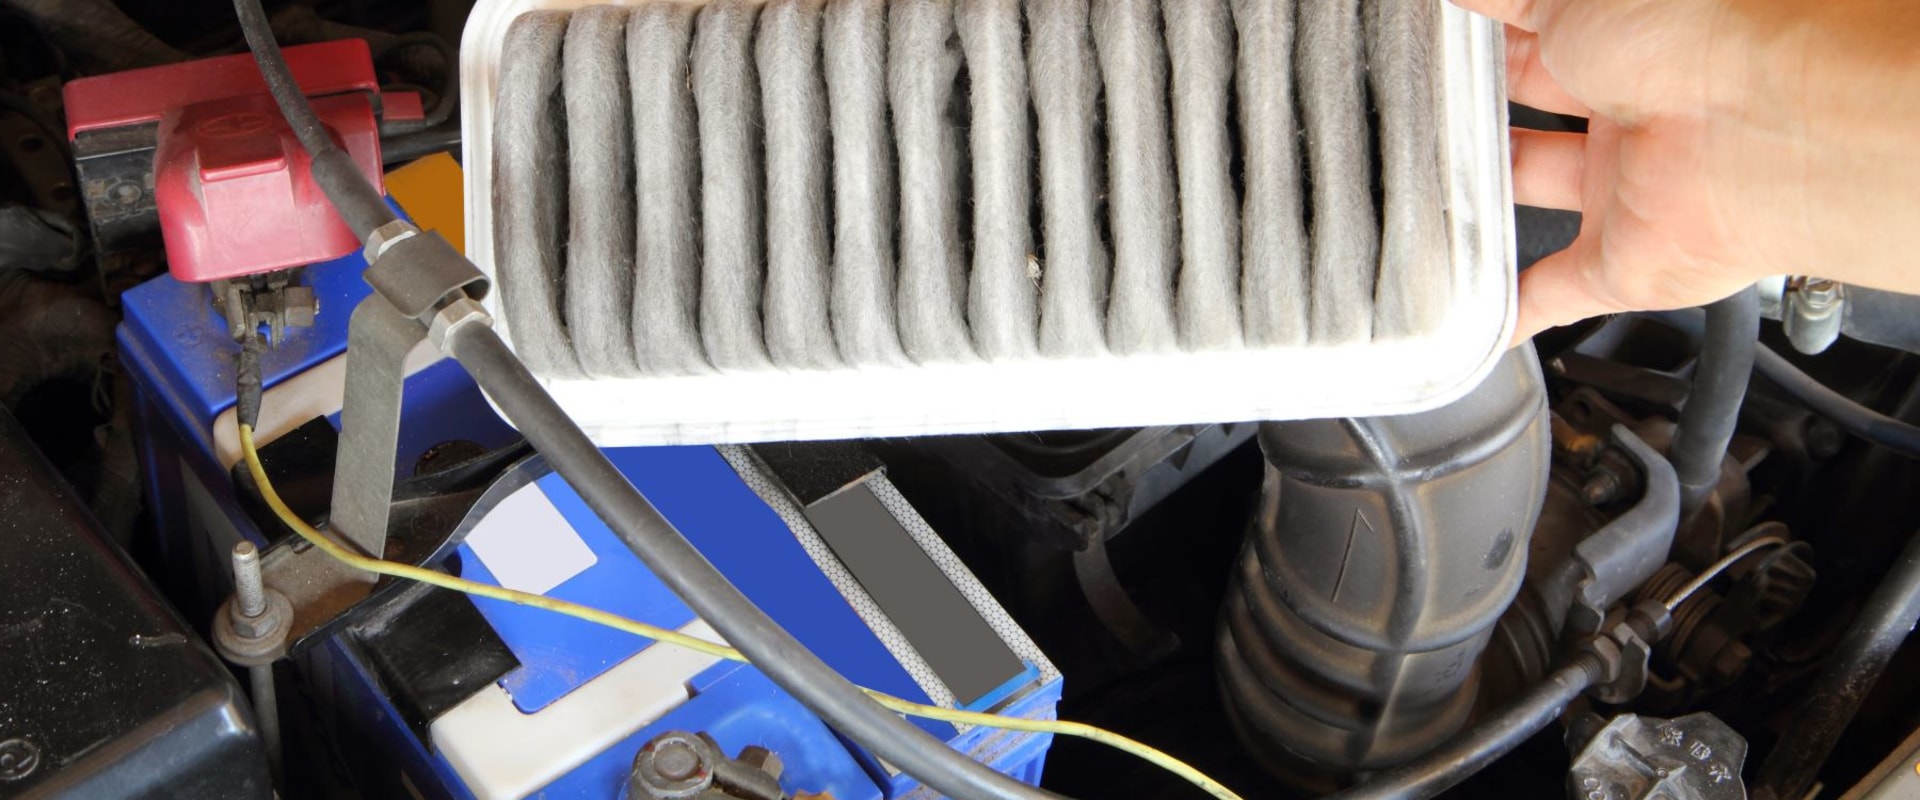 Does a Dirty Air Filter Impact Performance?